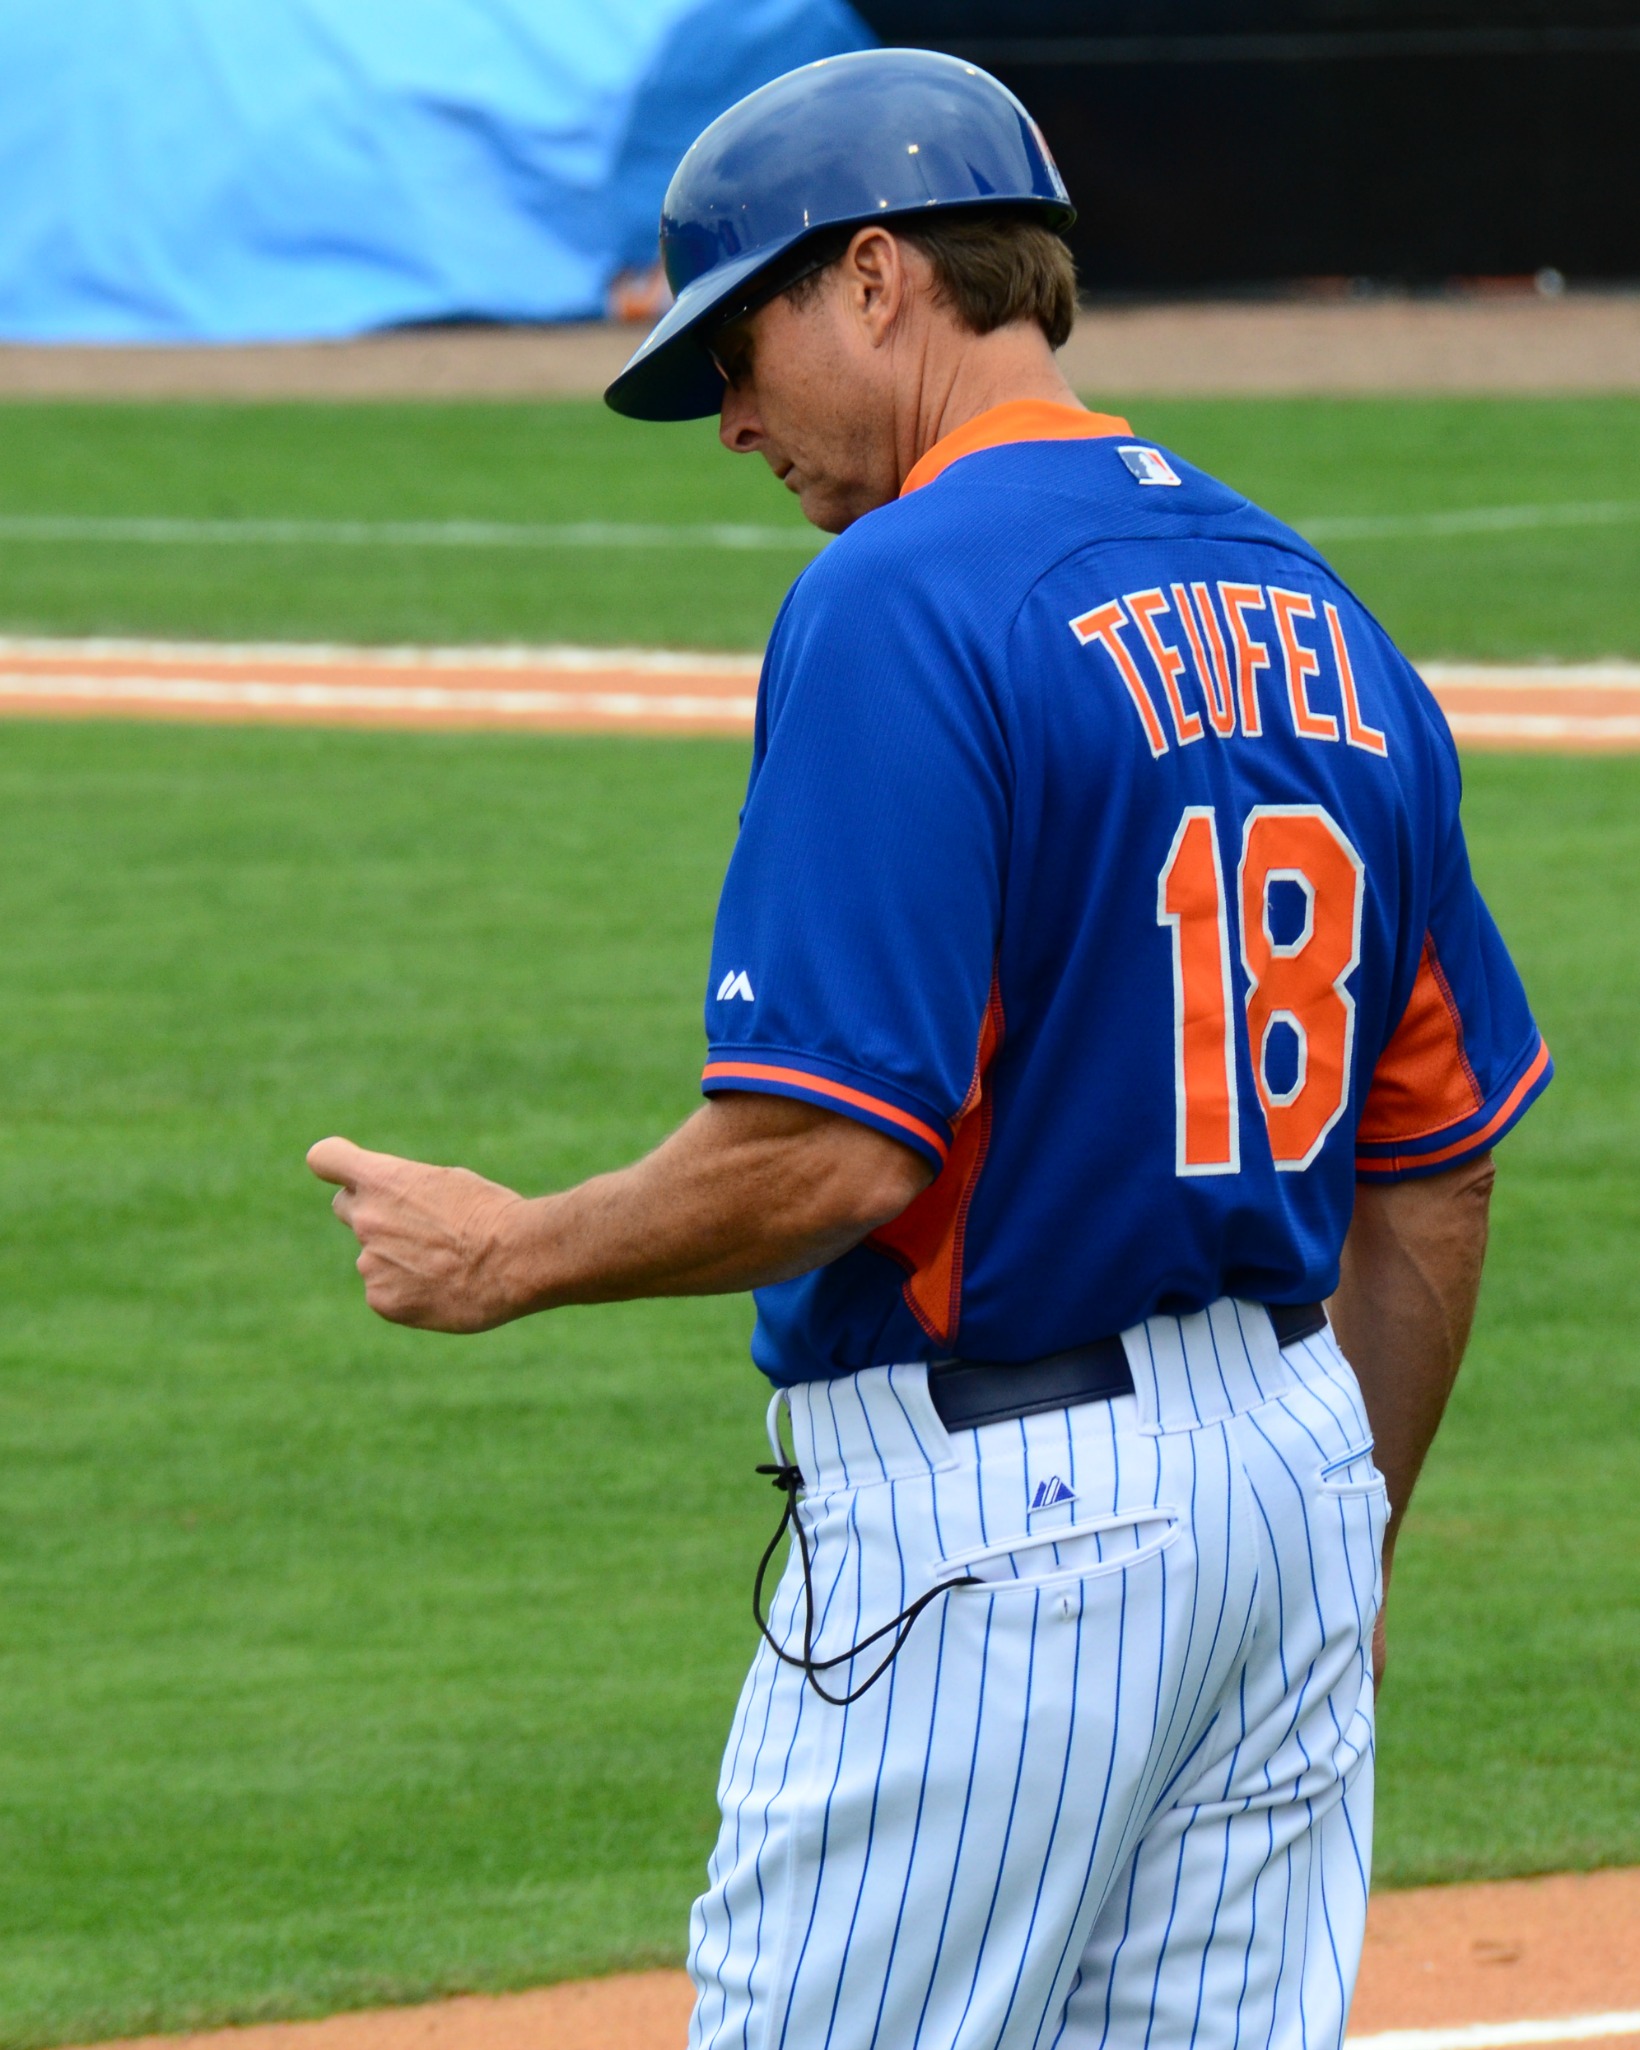 a baseball player with a blue jersey and numbers